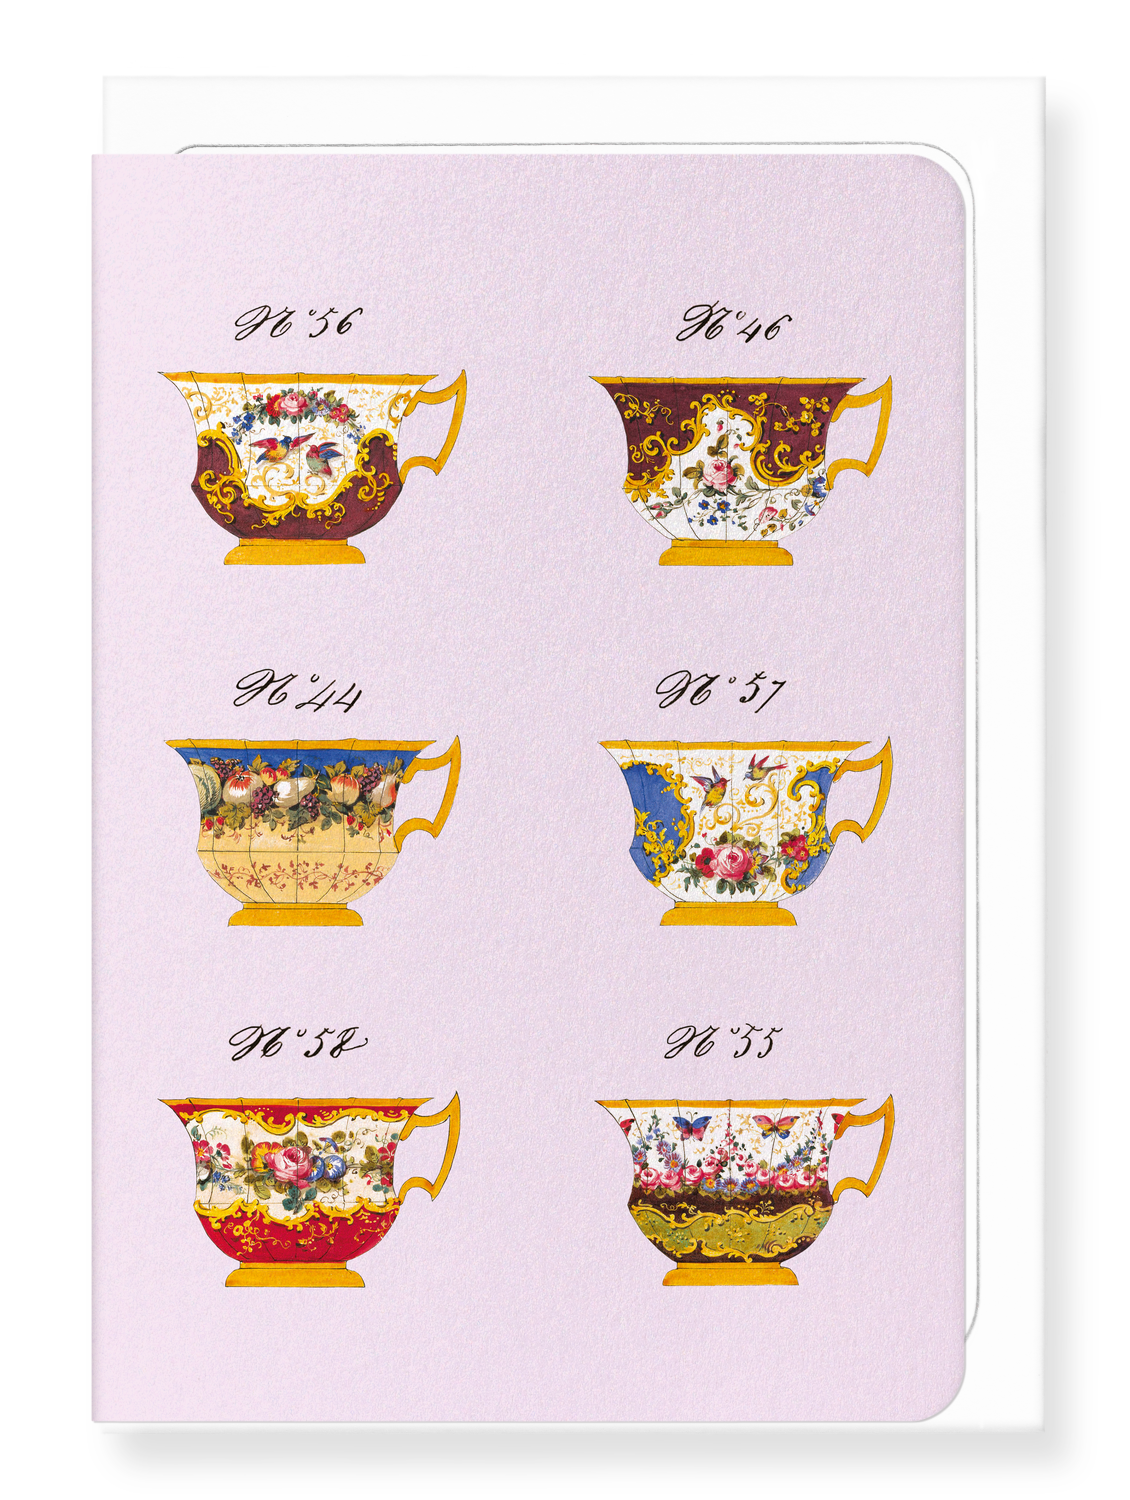 Ezen Designs - French Tea Cup Set F (c. 1825-1850) - Greeting Card - Front